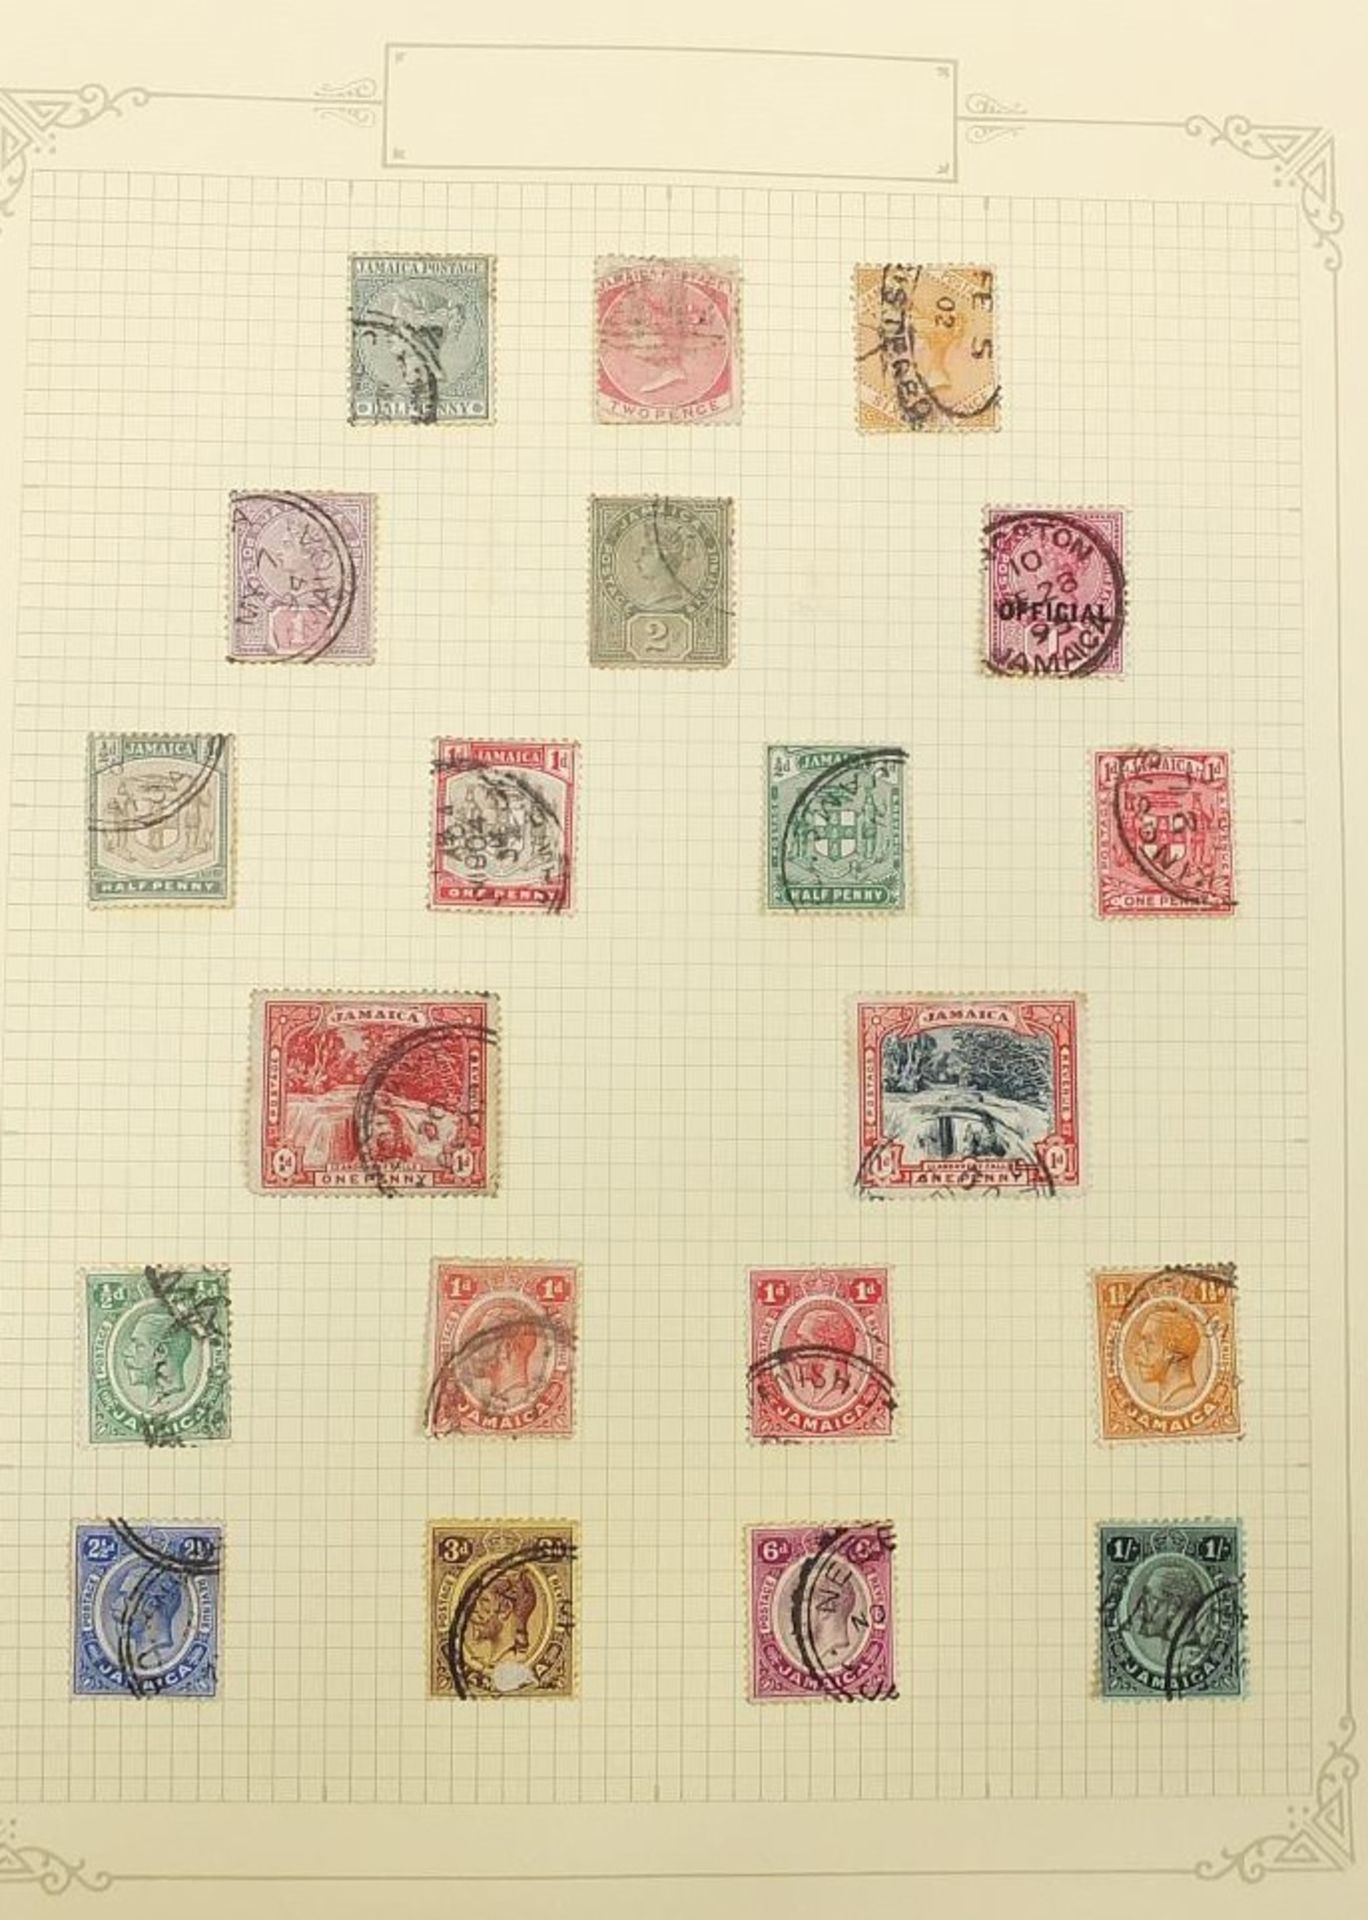 Commonwealth stamps Jamaica, Leeward Islands and British Levant arranged on several pages